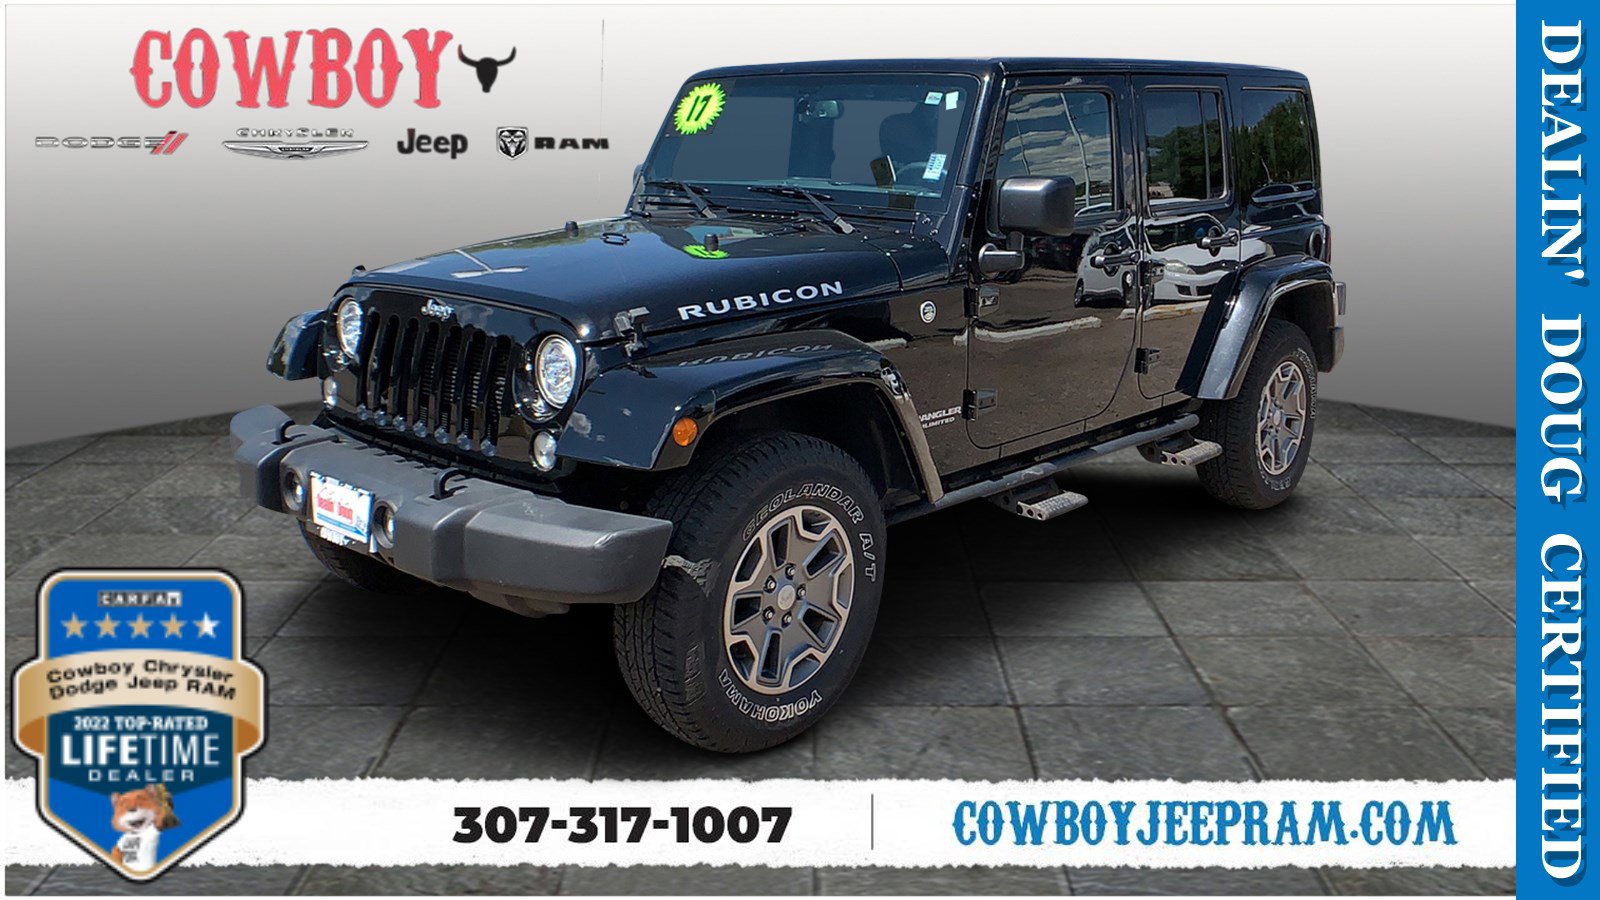 Used 2017 Jeep Wrangler Unlimited Rubicon 4x4 For Sale | Cheyenne WY